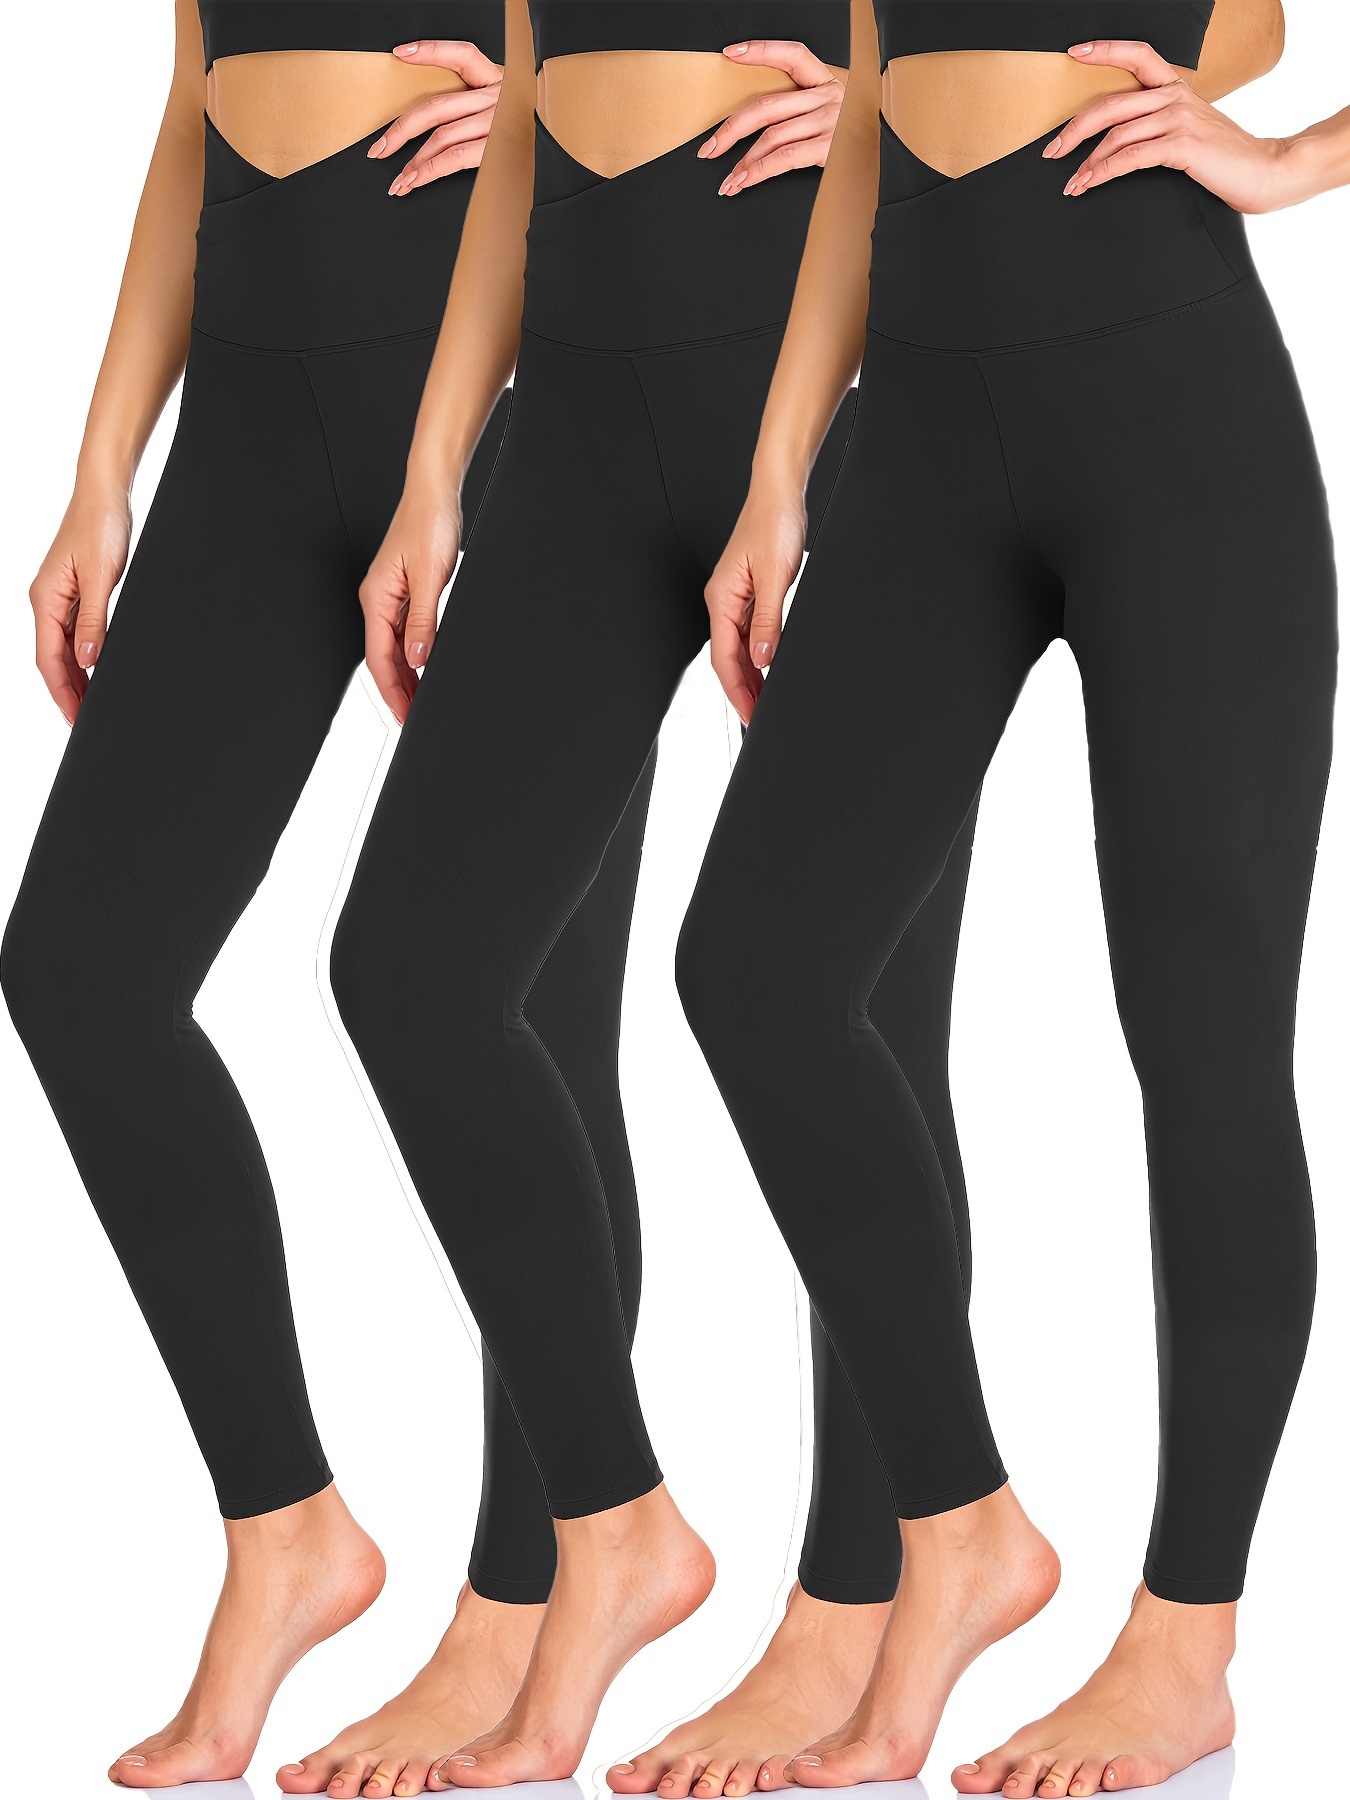 V Cross Waist Leggings for Women Tummy Control-Soft High Waisted Non See  Through Black Yoga Pants at  Women's Clothing store